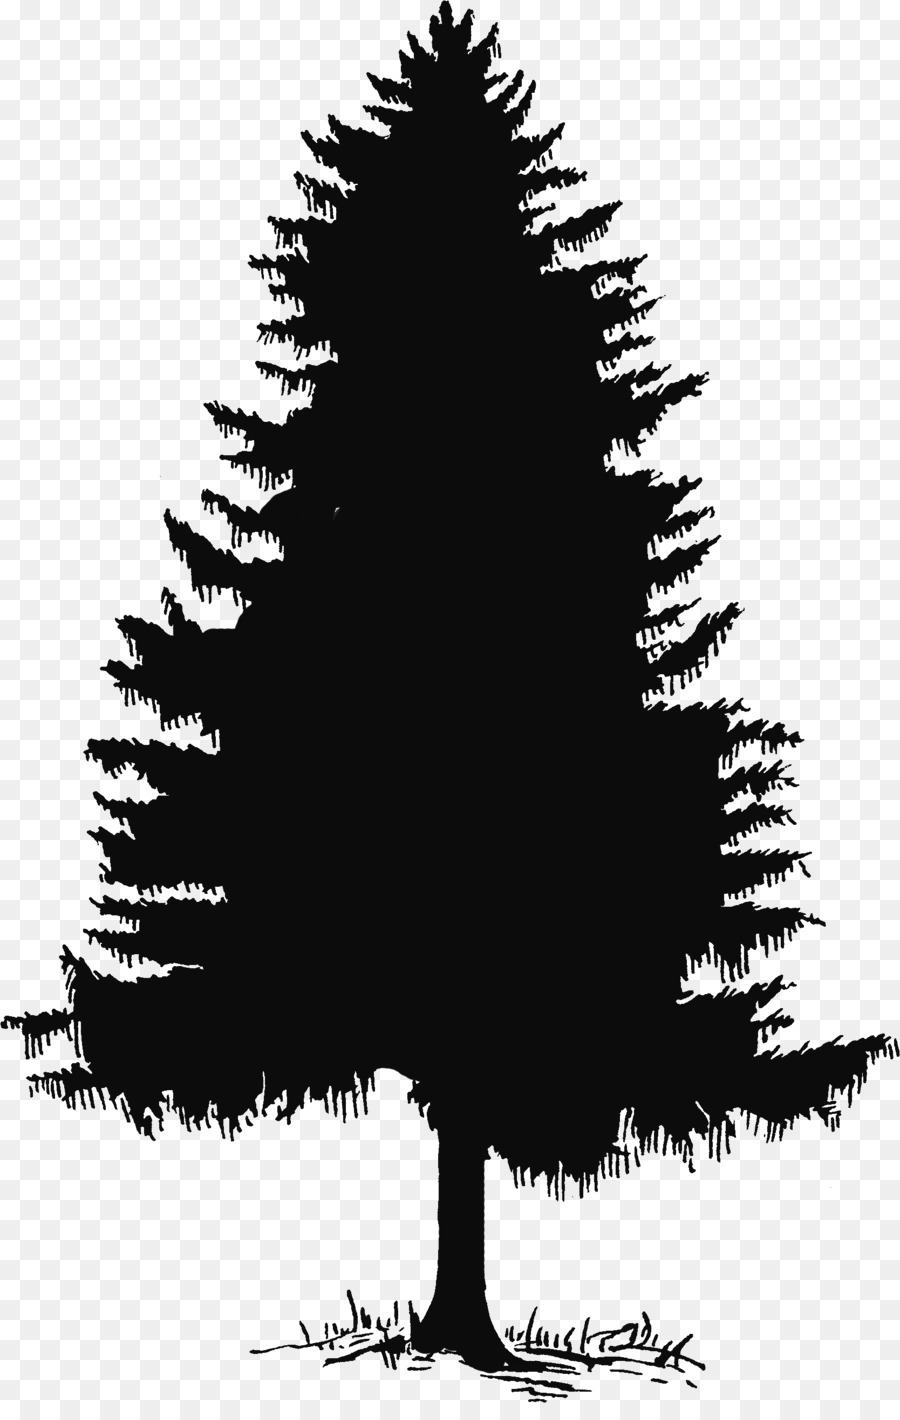 Evergreen Tree Pine Silhouette Clip art - Cedar Tree Cliparts png download - 1668*2601 - Free Transparent Evergreen png Download.